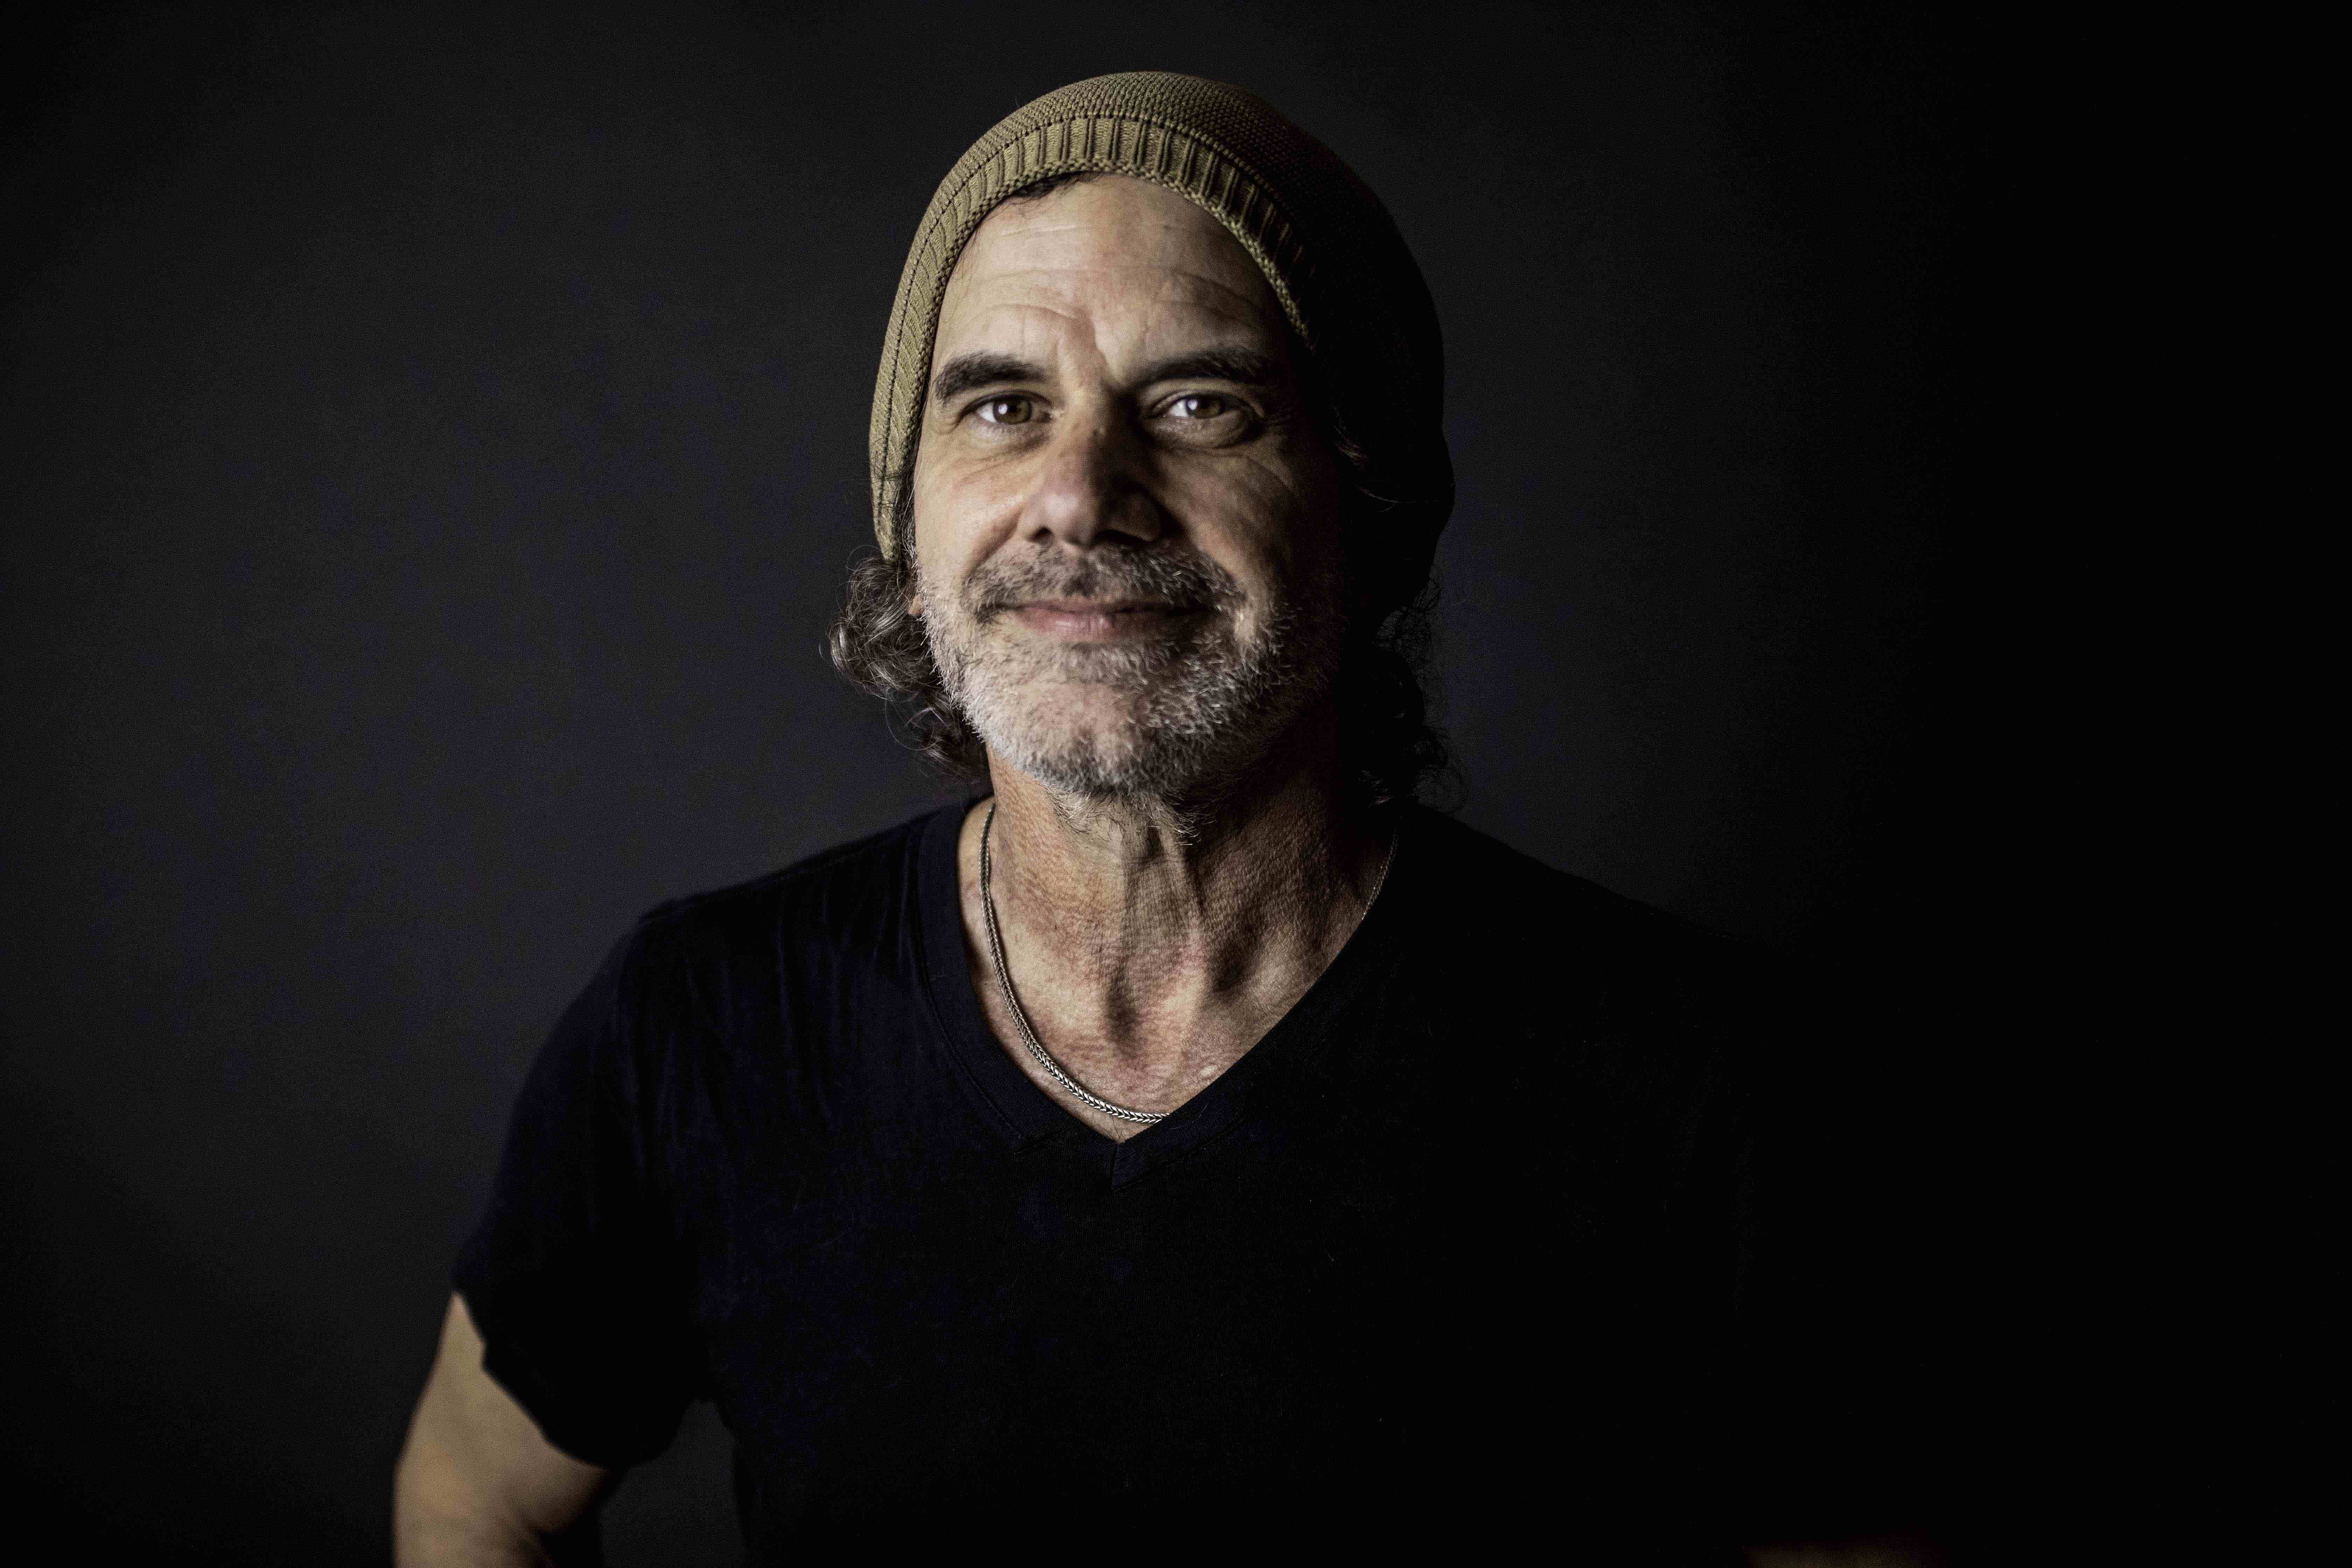 Kenny Withrow of Edie Brickell and the New Bohemians